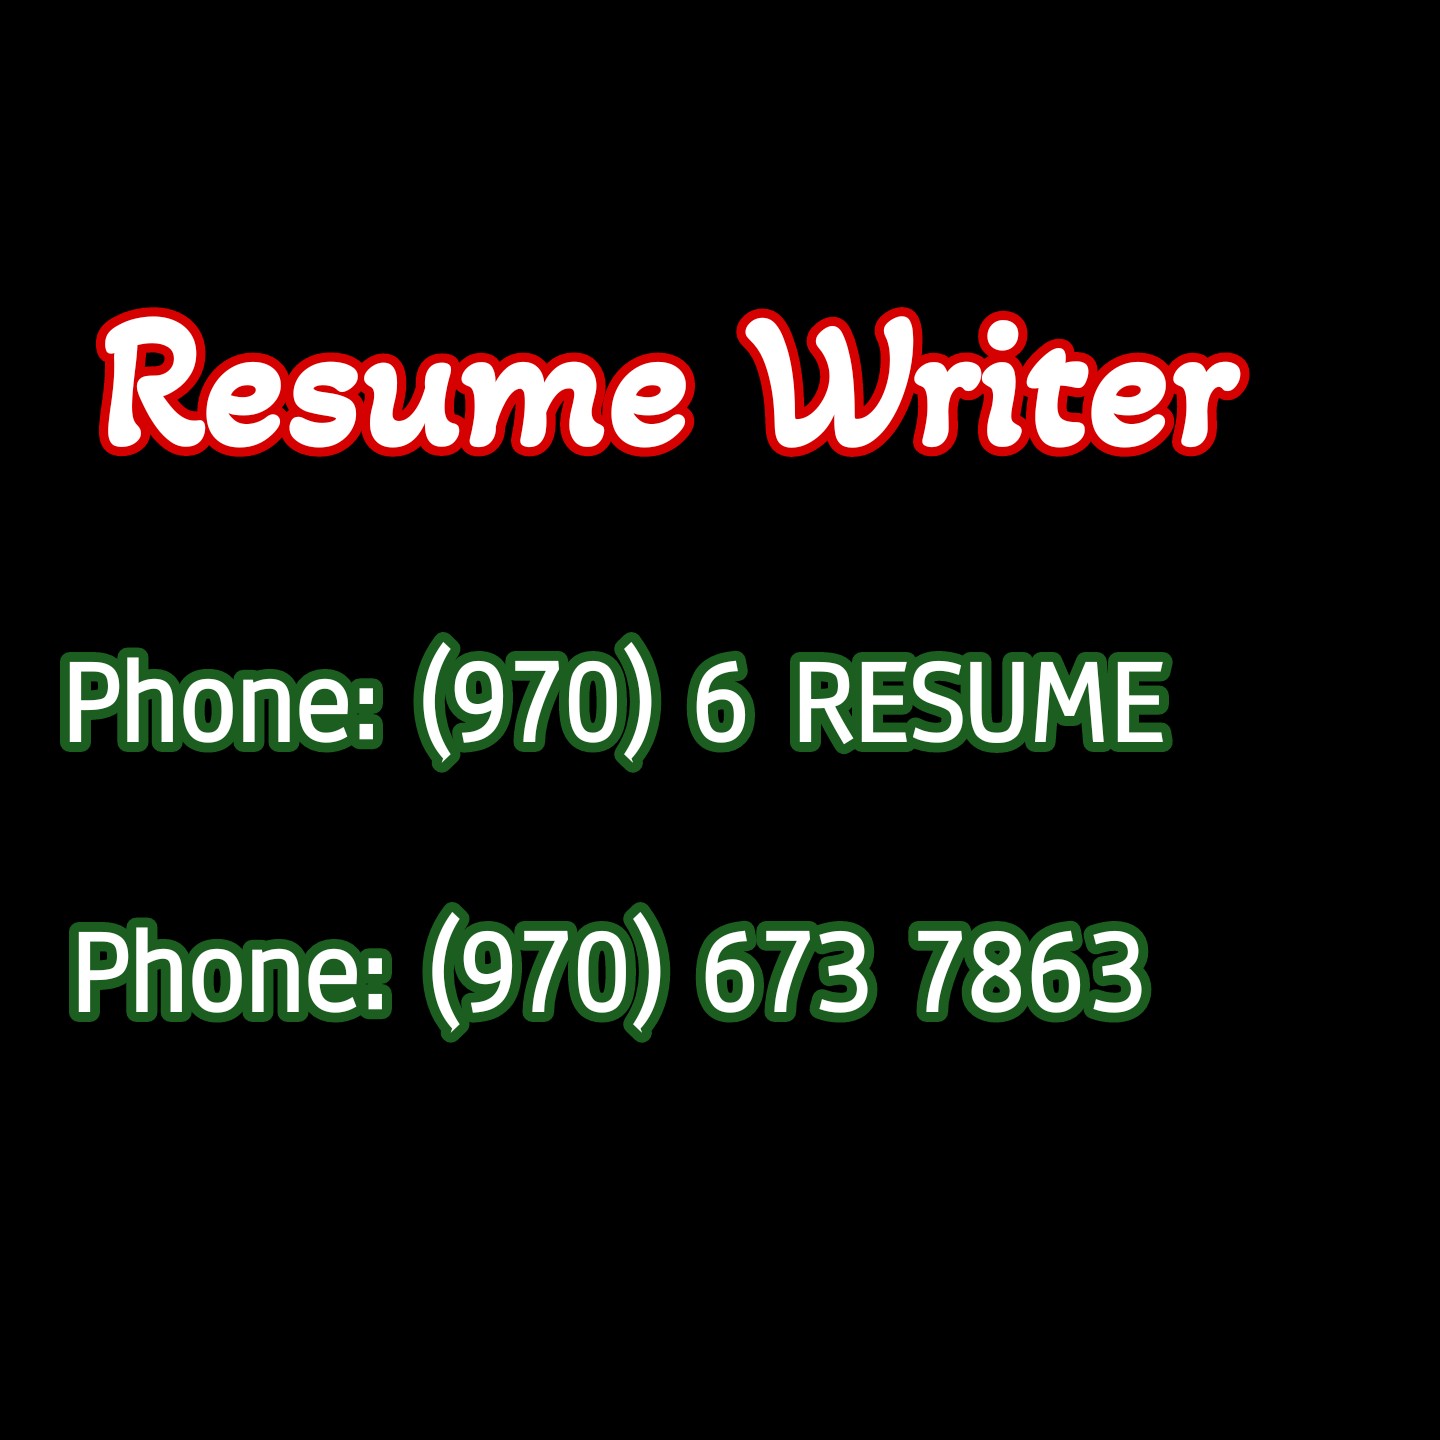 Update your resume today!